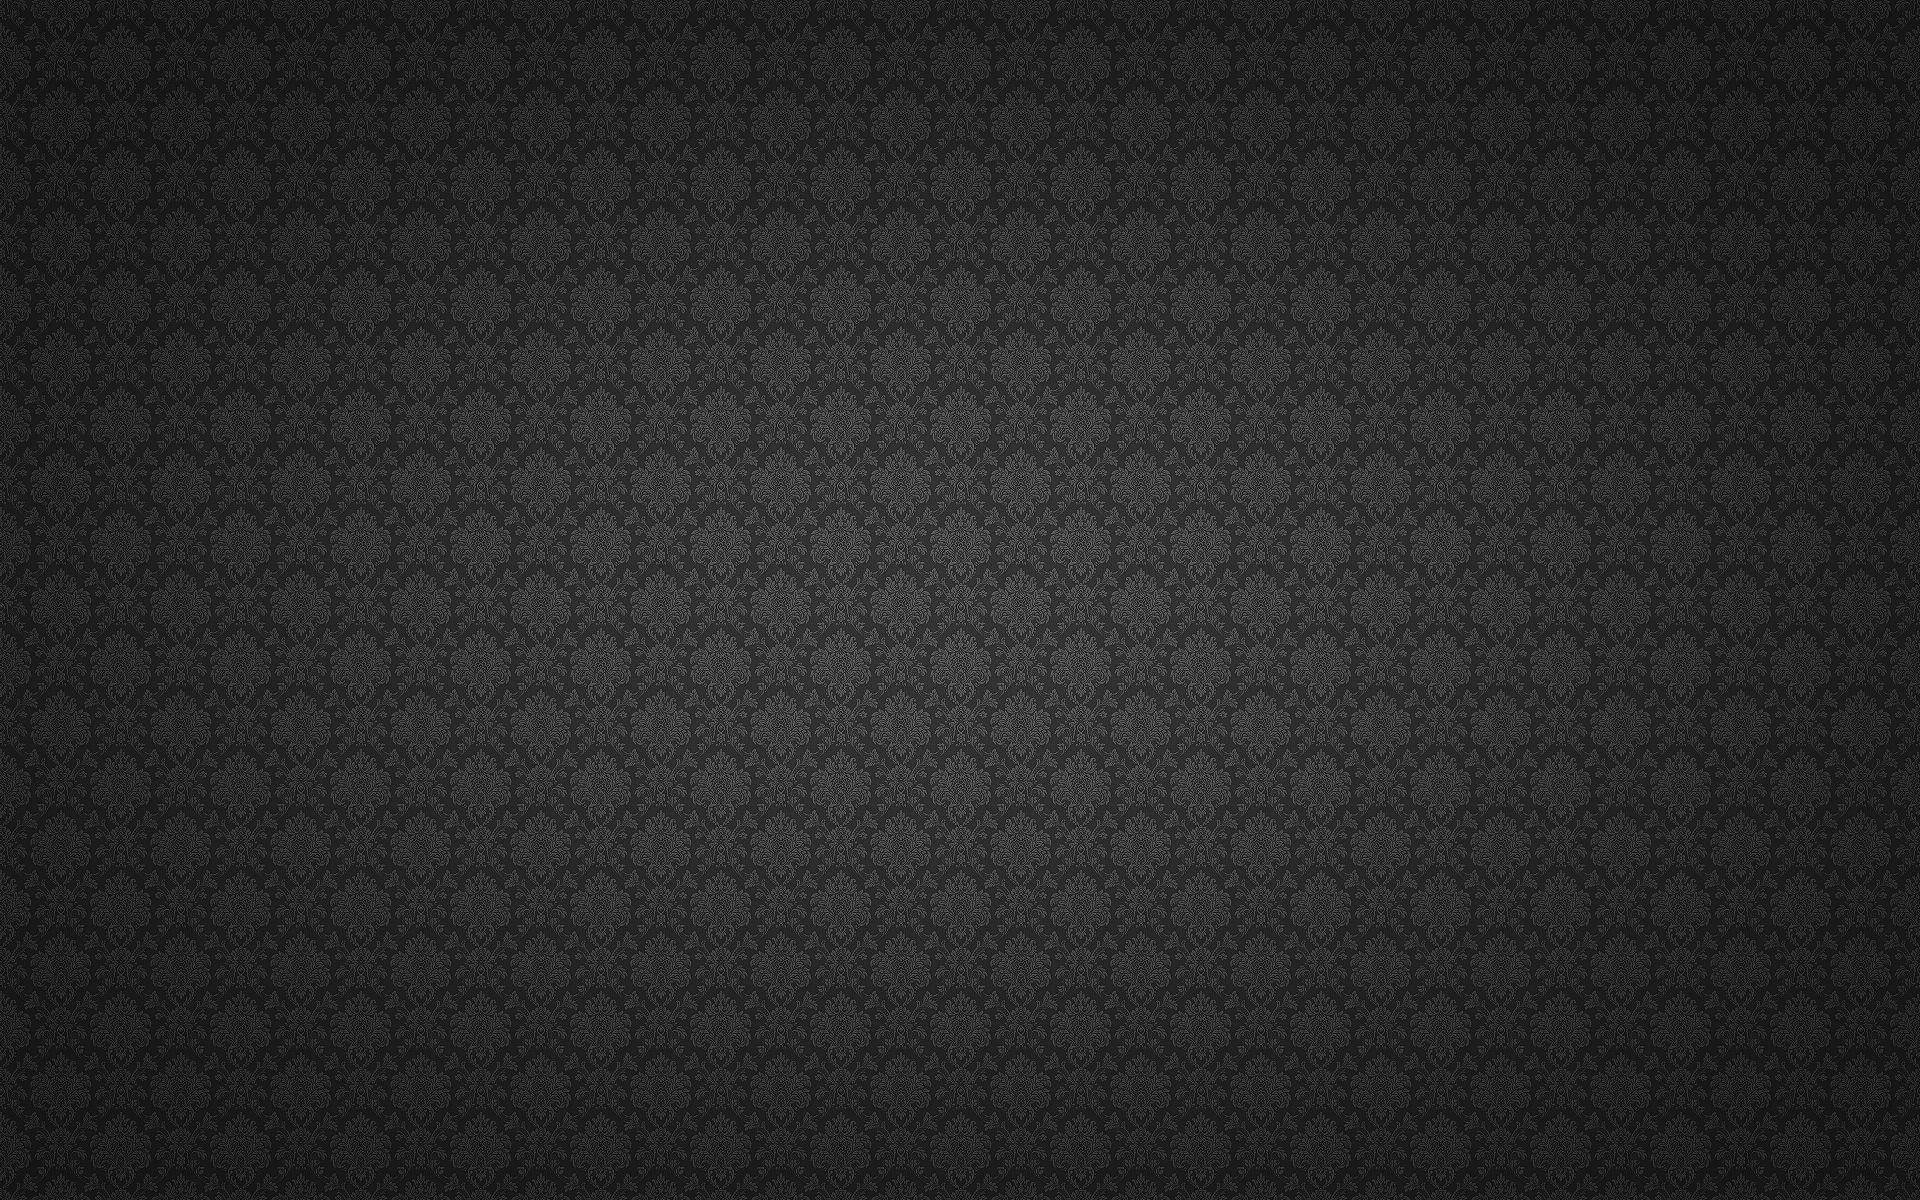 Plain Black With Gothic Pattern Background